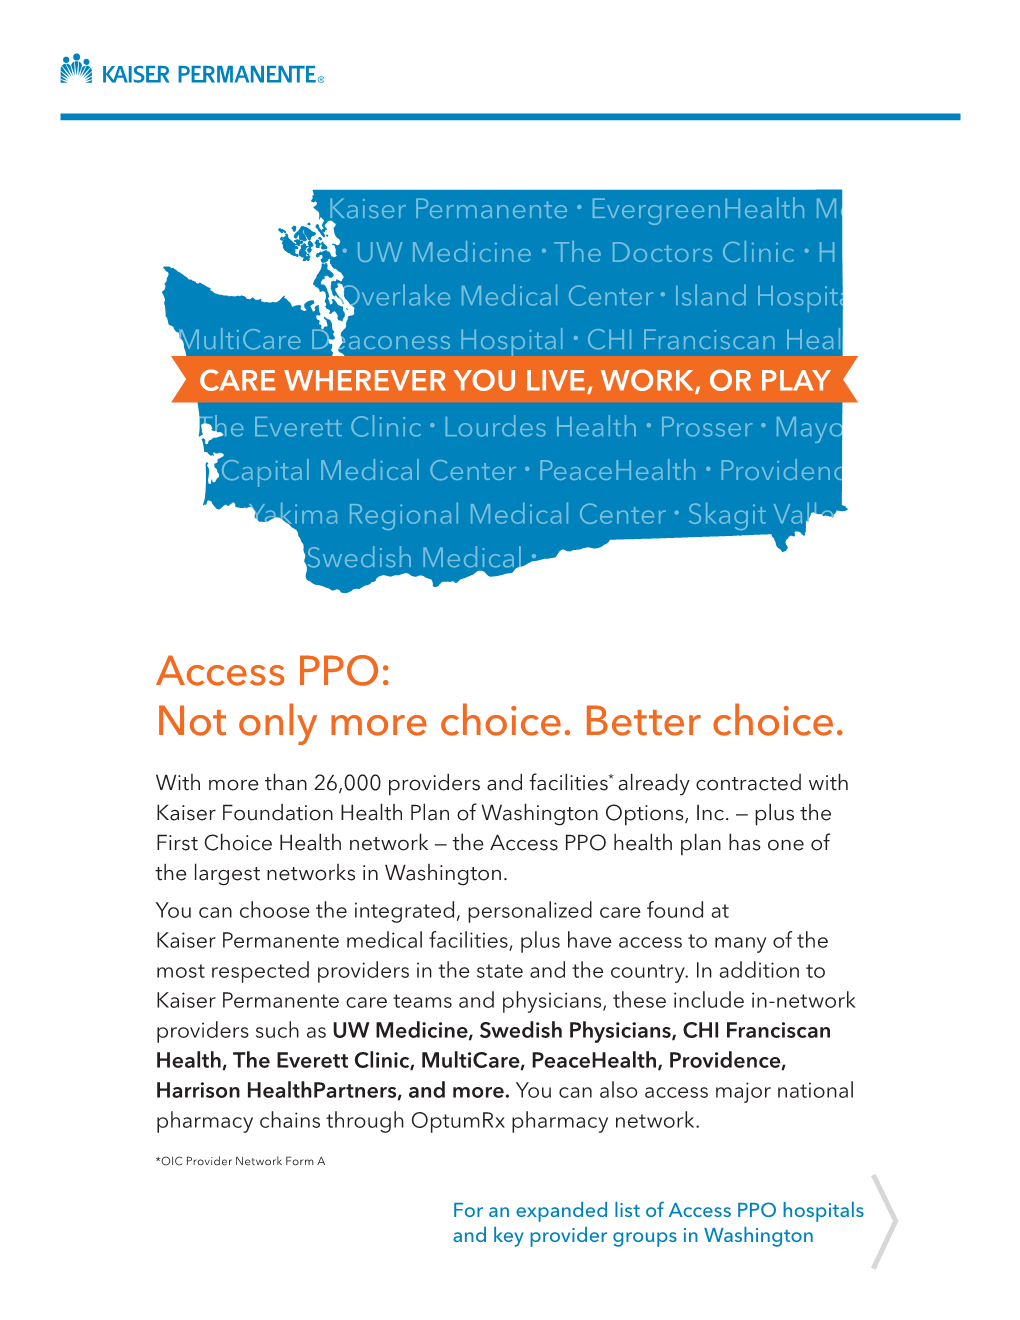 Access PPO: Not Only More Choice. Better Choice